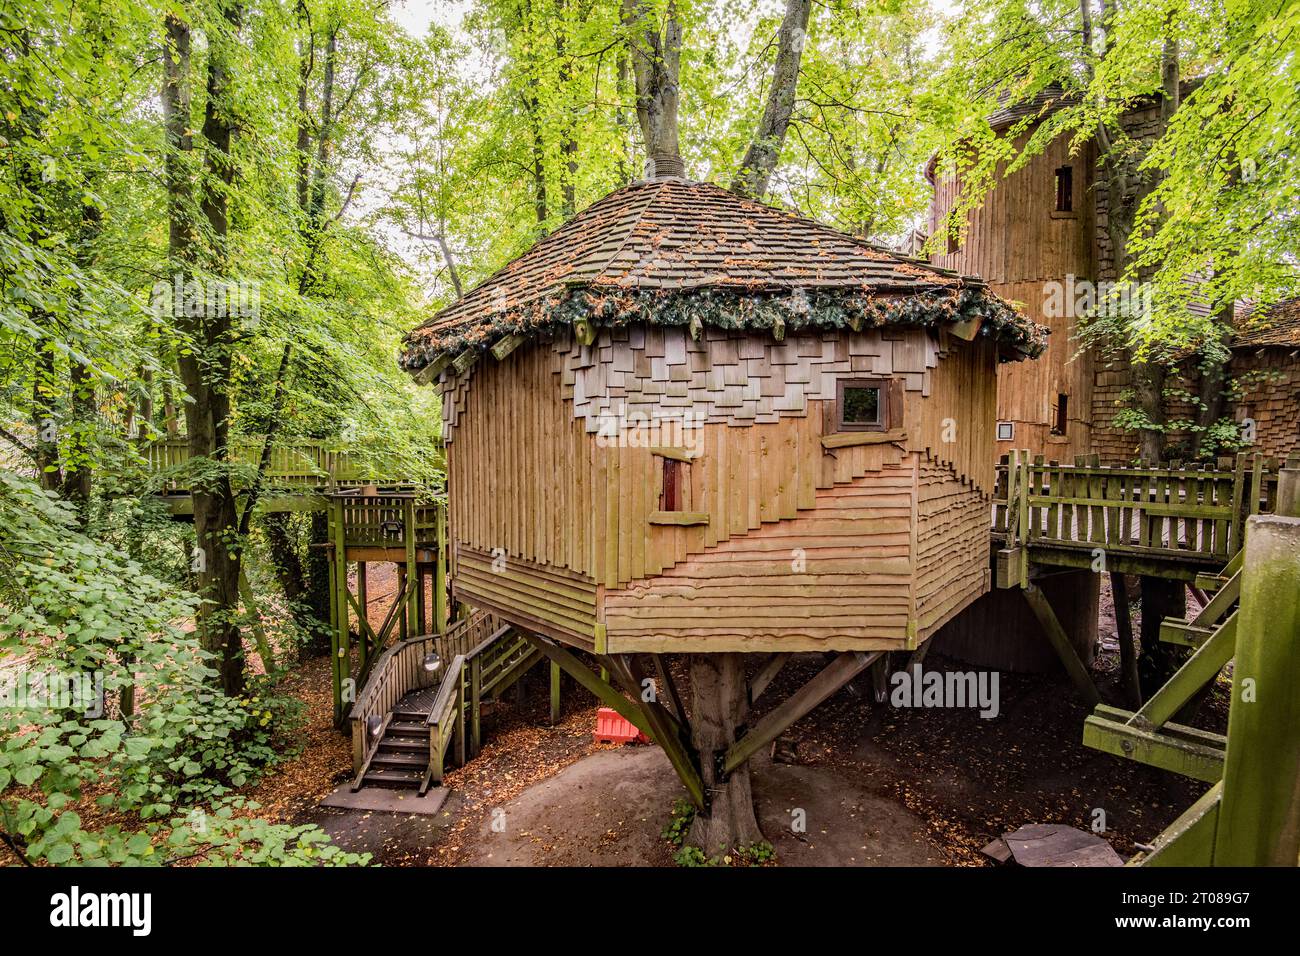 The quirky Treehouse at Alnwick Gardens in Northumberland is around sixty feet off the ground and has a restaurant and wedding venue. Stock Photo